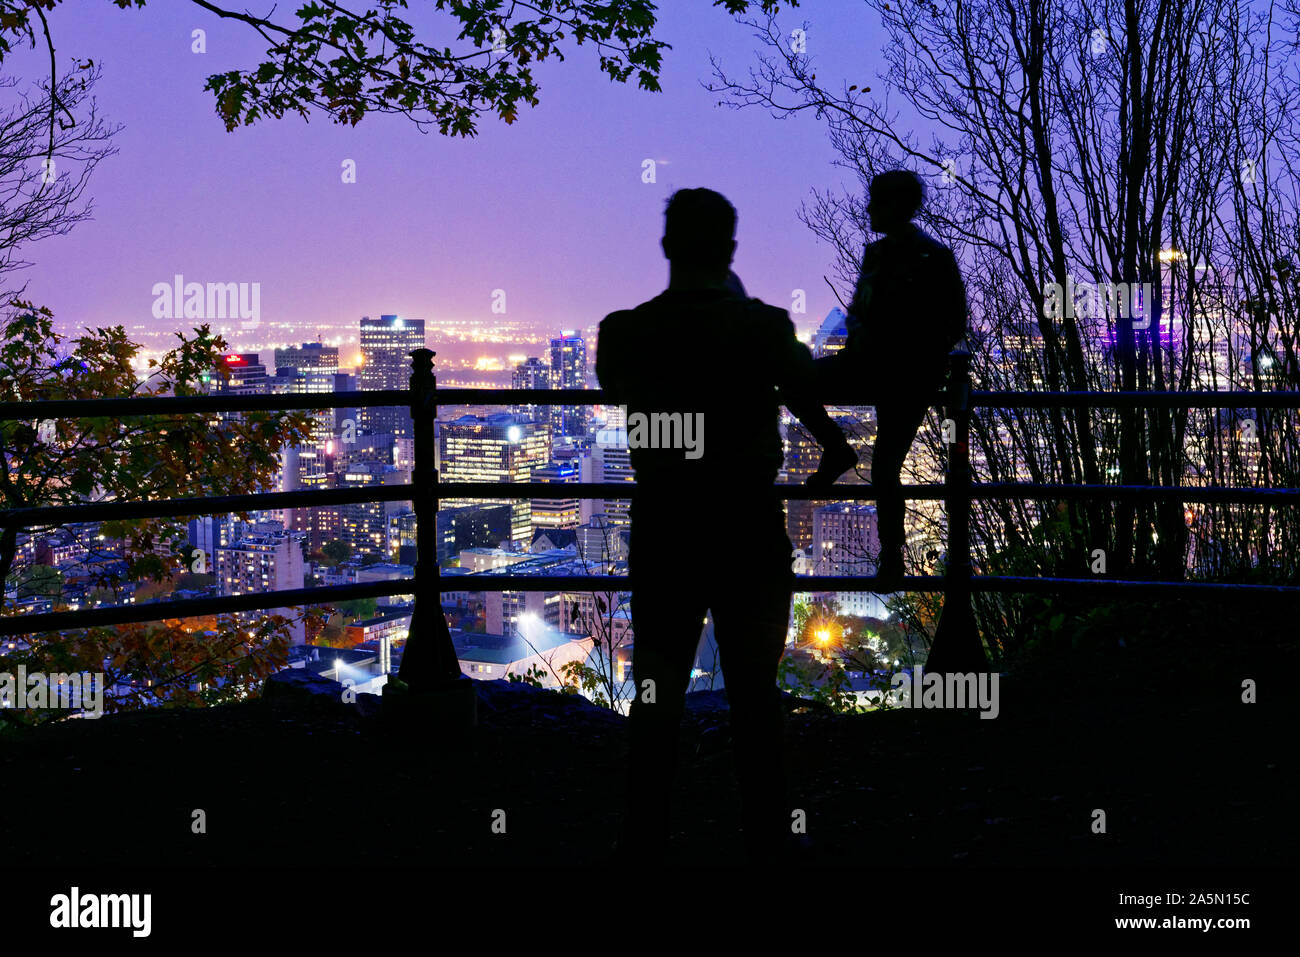 People looking out over Montreal city centre at dusk from a viewpoint on Mont Royal, Canada Stock Photo